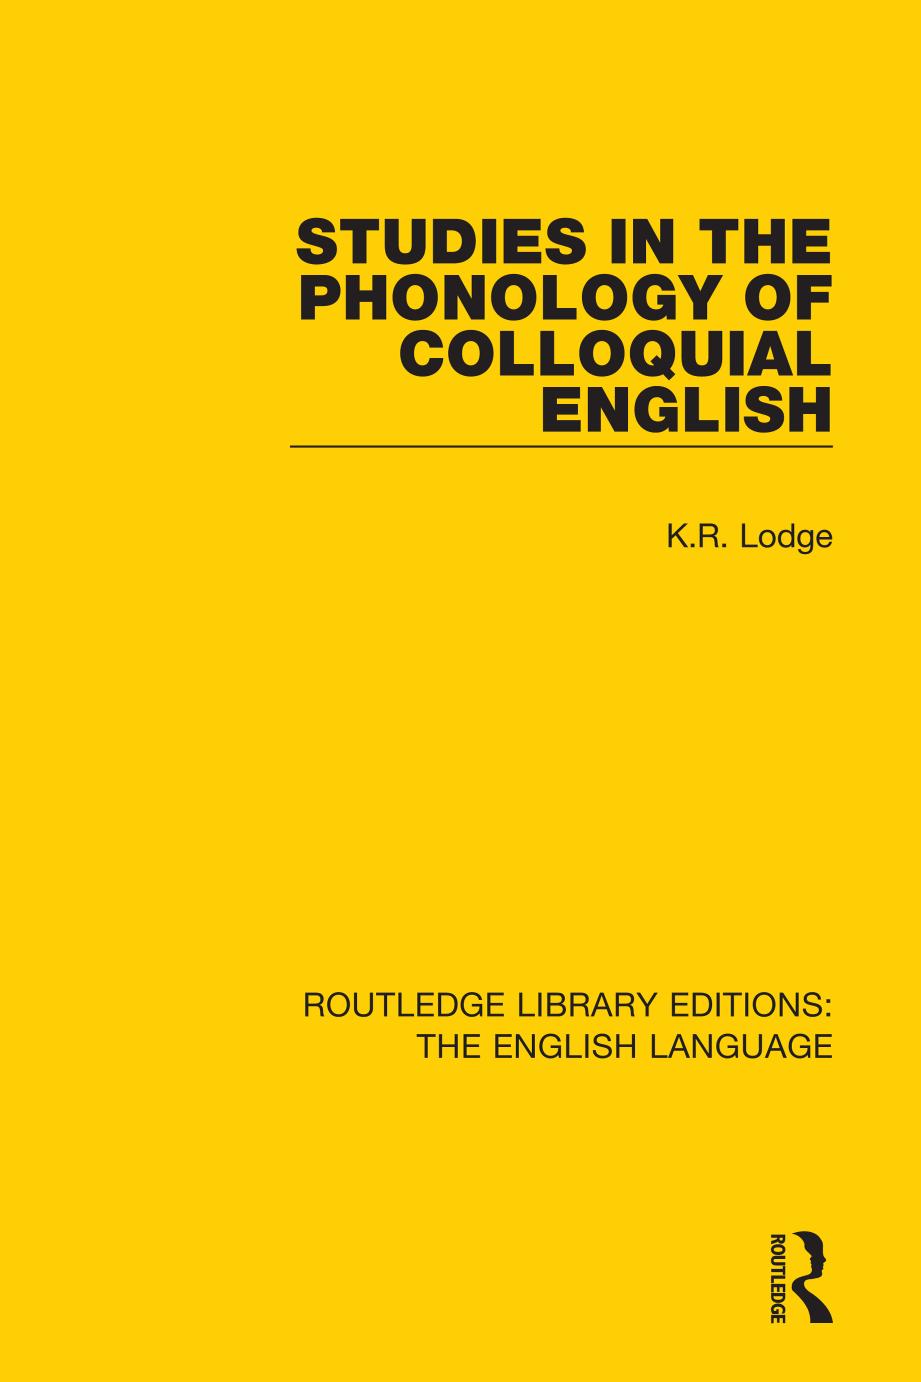 Studies in the Phonology of Colloquial English